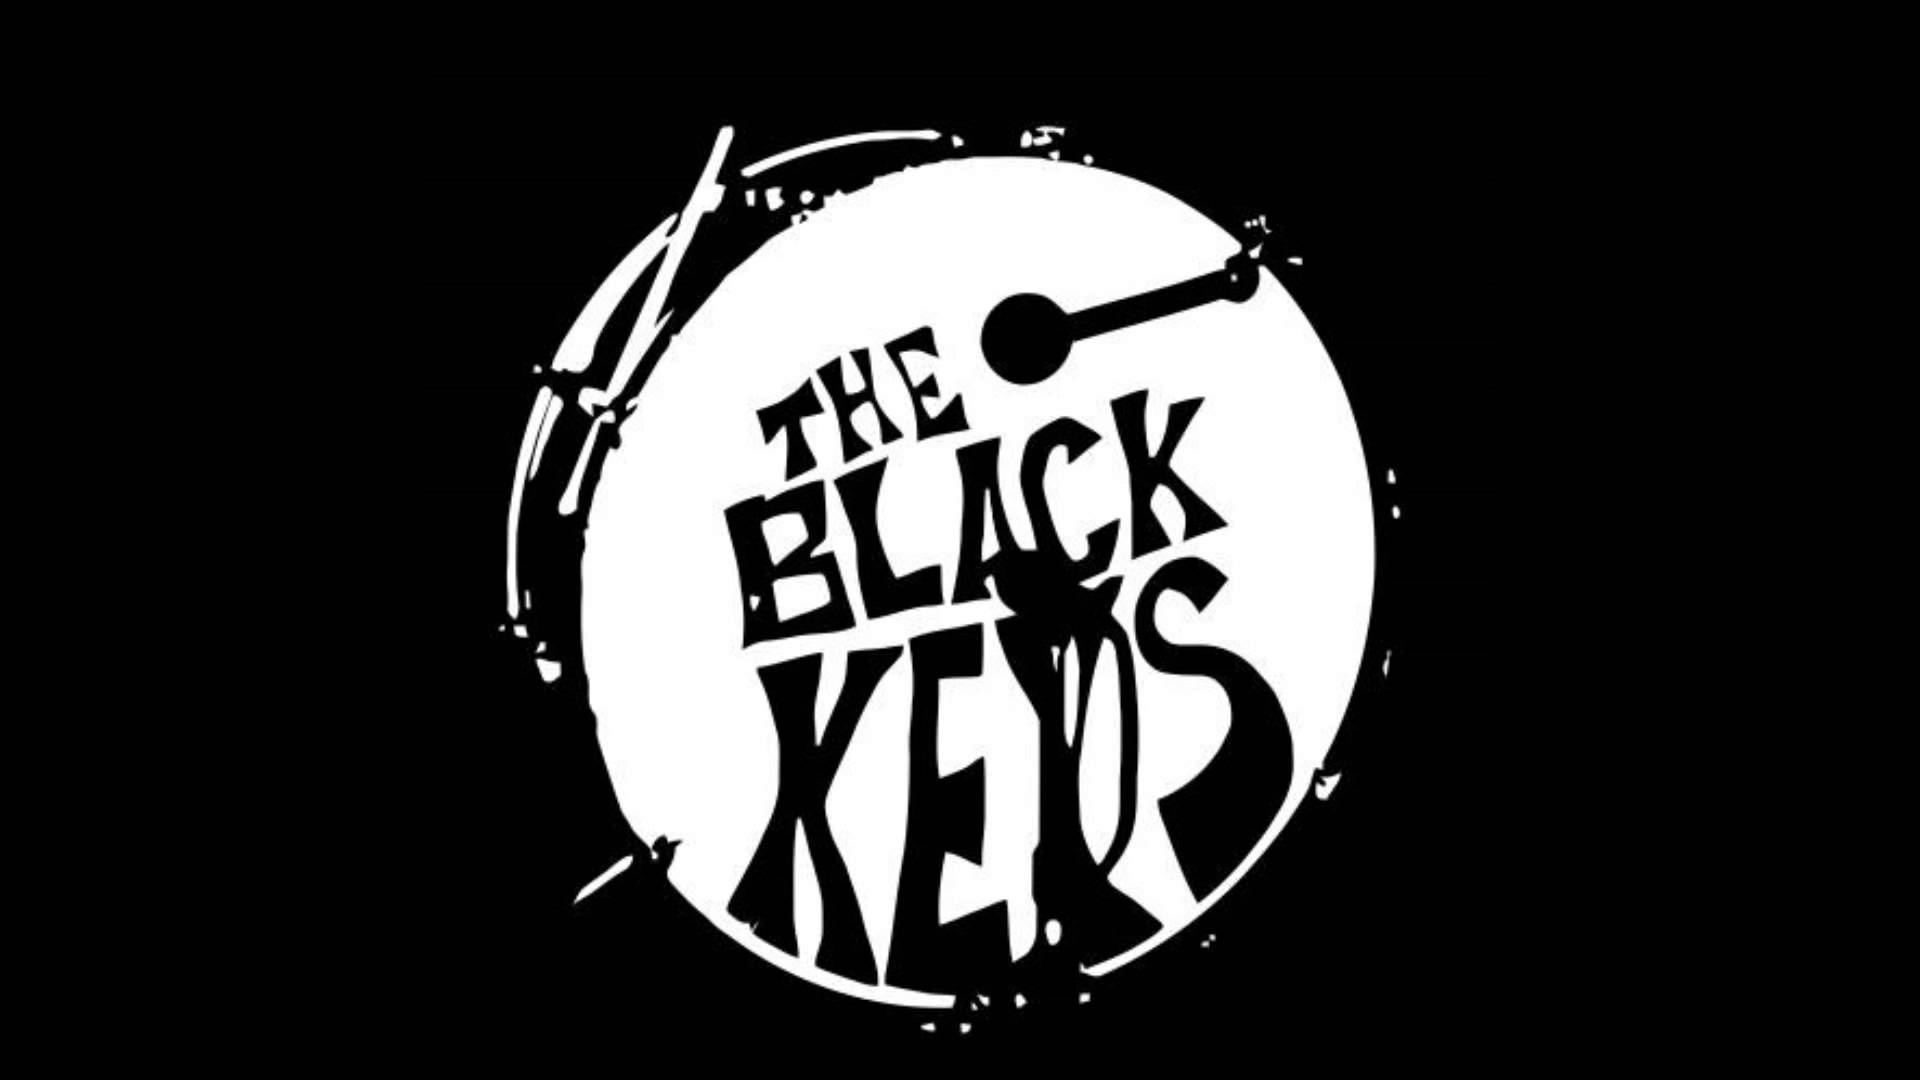 The Black Keys wallpapers, Top free backgrounds, Stunning design choices, Showcasing the band's aesthetic, 1920x1080 Full HD Desktop